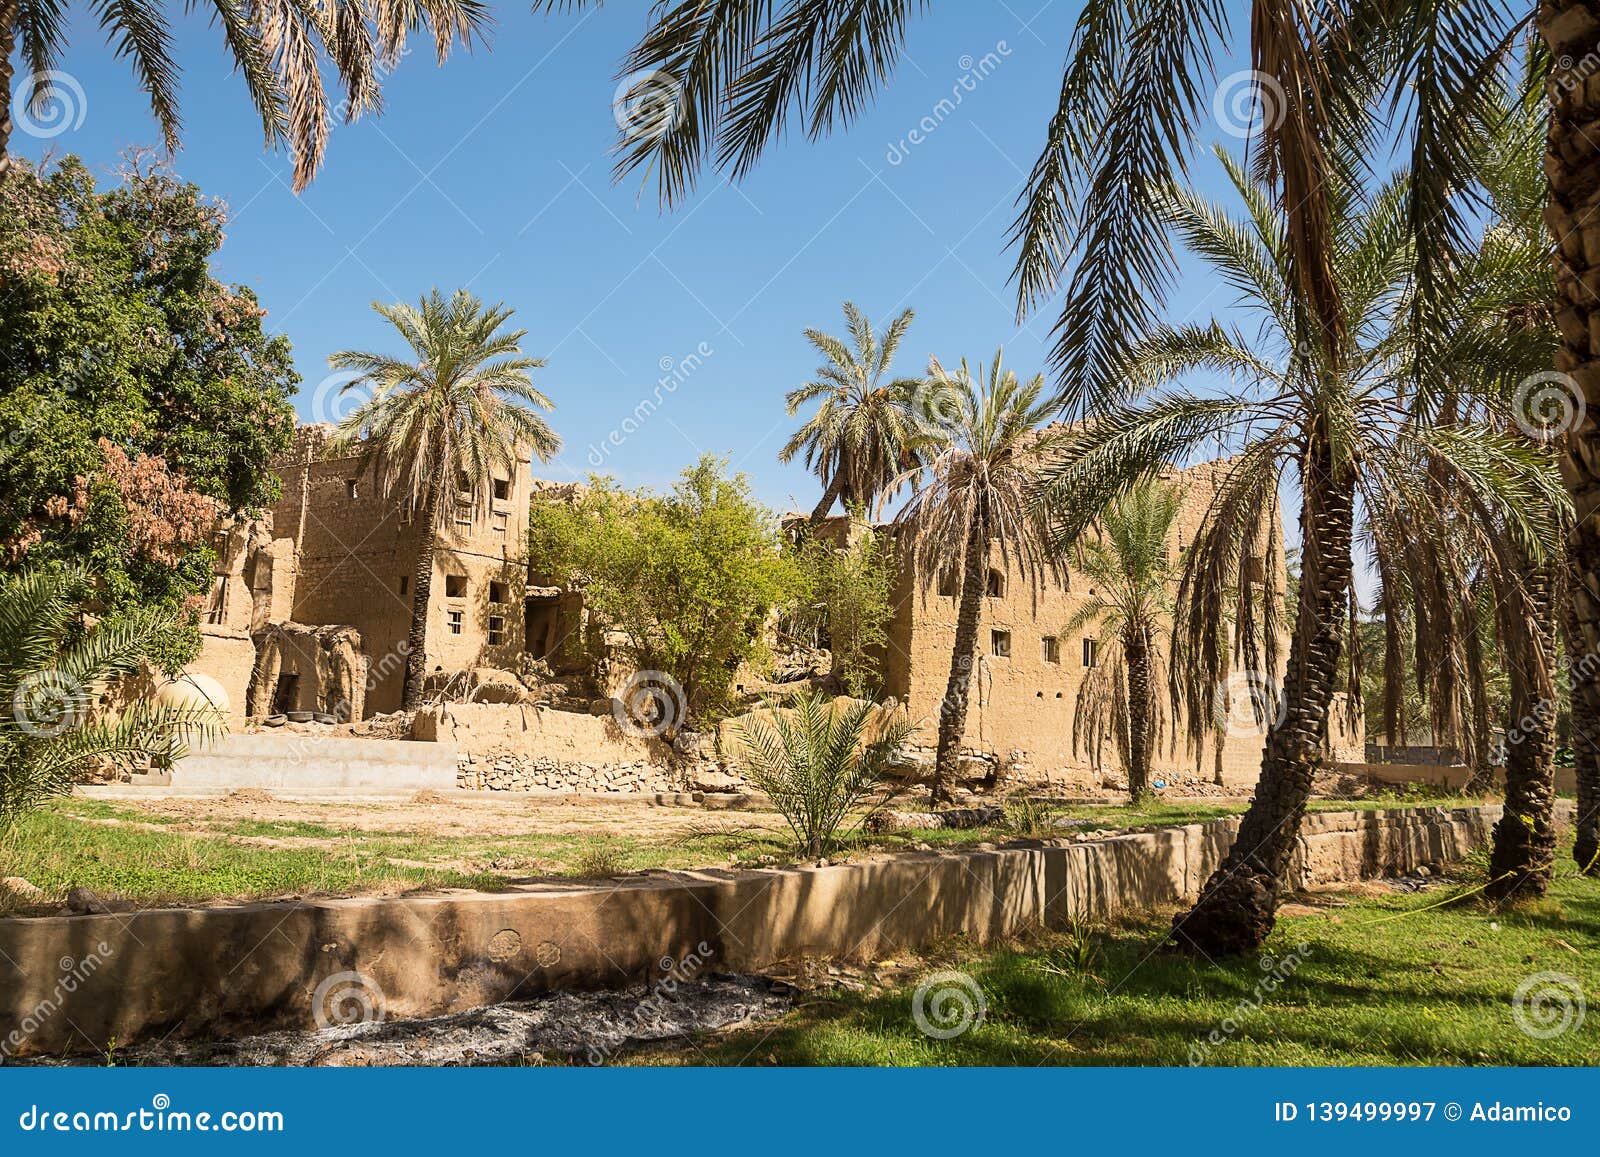 old mud houses and palm tree in the old village of al hamra